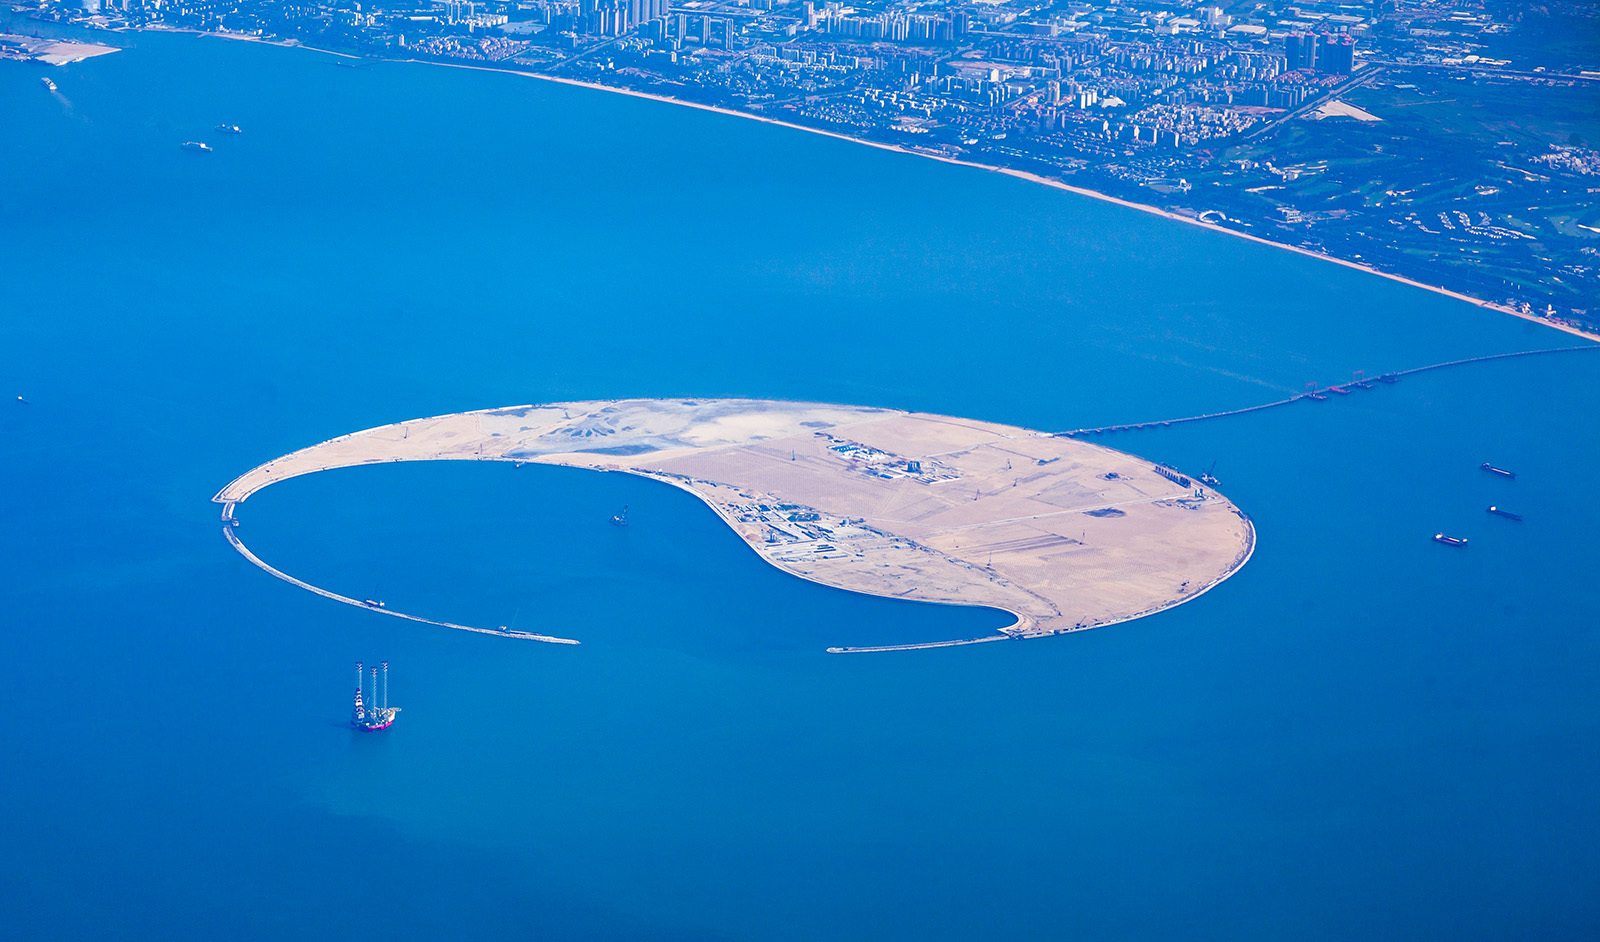 The island as it currently stands in Haikou Bay. Image courtesy of Hainan Airlines Group